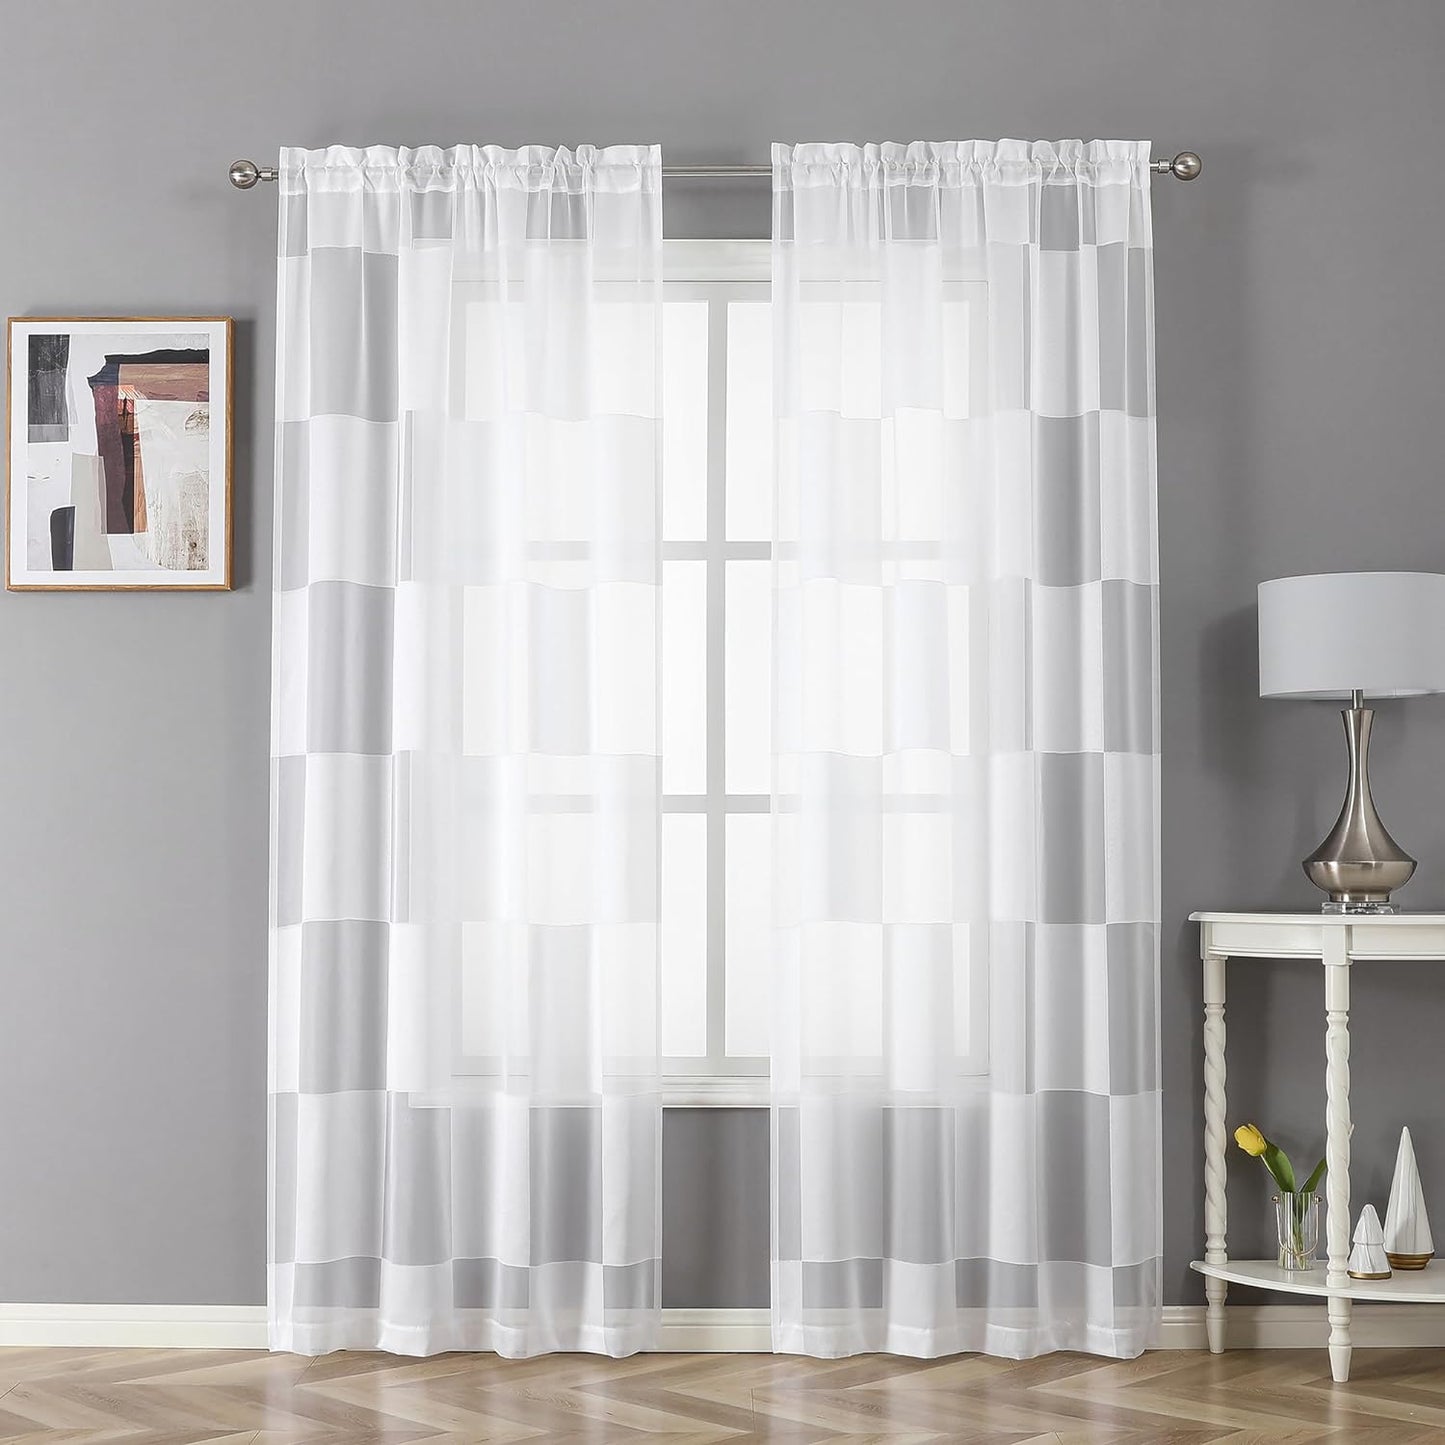 OVZME Sage Green Sheer Bedroom Curtains 84 Inch Length 2 Panels Set, Dual Rod Pocket Clip Checkered Window Curtains for Living Room, Light Filtering & Privacy Sheer Green Drapes, Each 42W X 84L  OVZME White 42W X 84L 